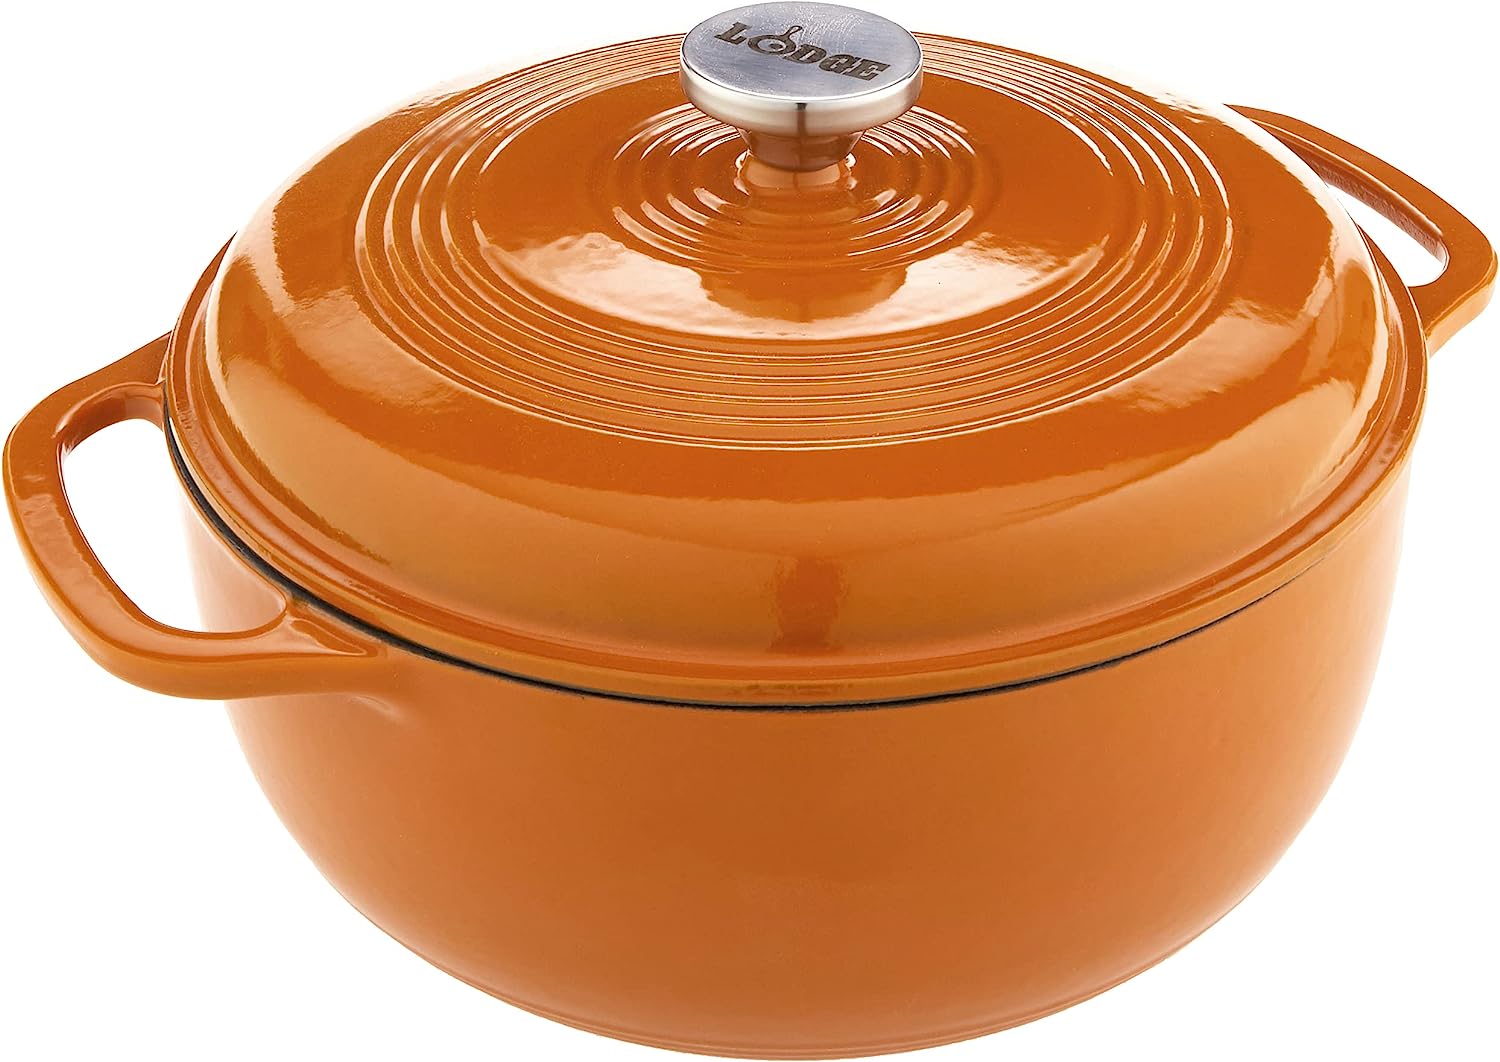  Lodge 6 Quart Enameled Cast Iron Dutch Oven with Lid – Dual  Handles – Oven Safe up to 500° F or on Stovetop - Use to Marinate, Cook,  Bake, Refrigerate and